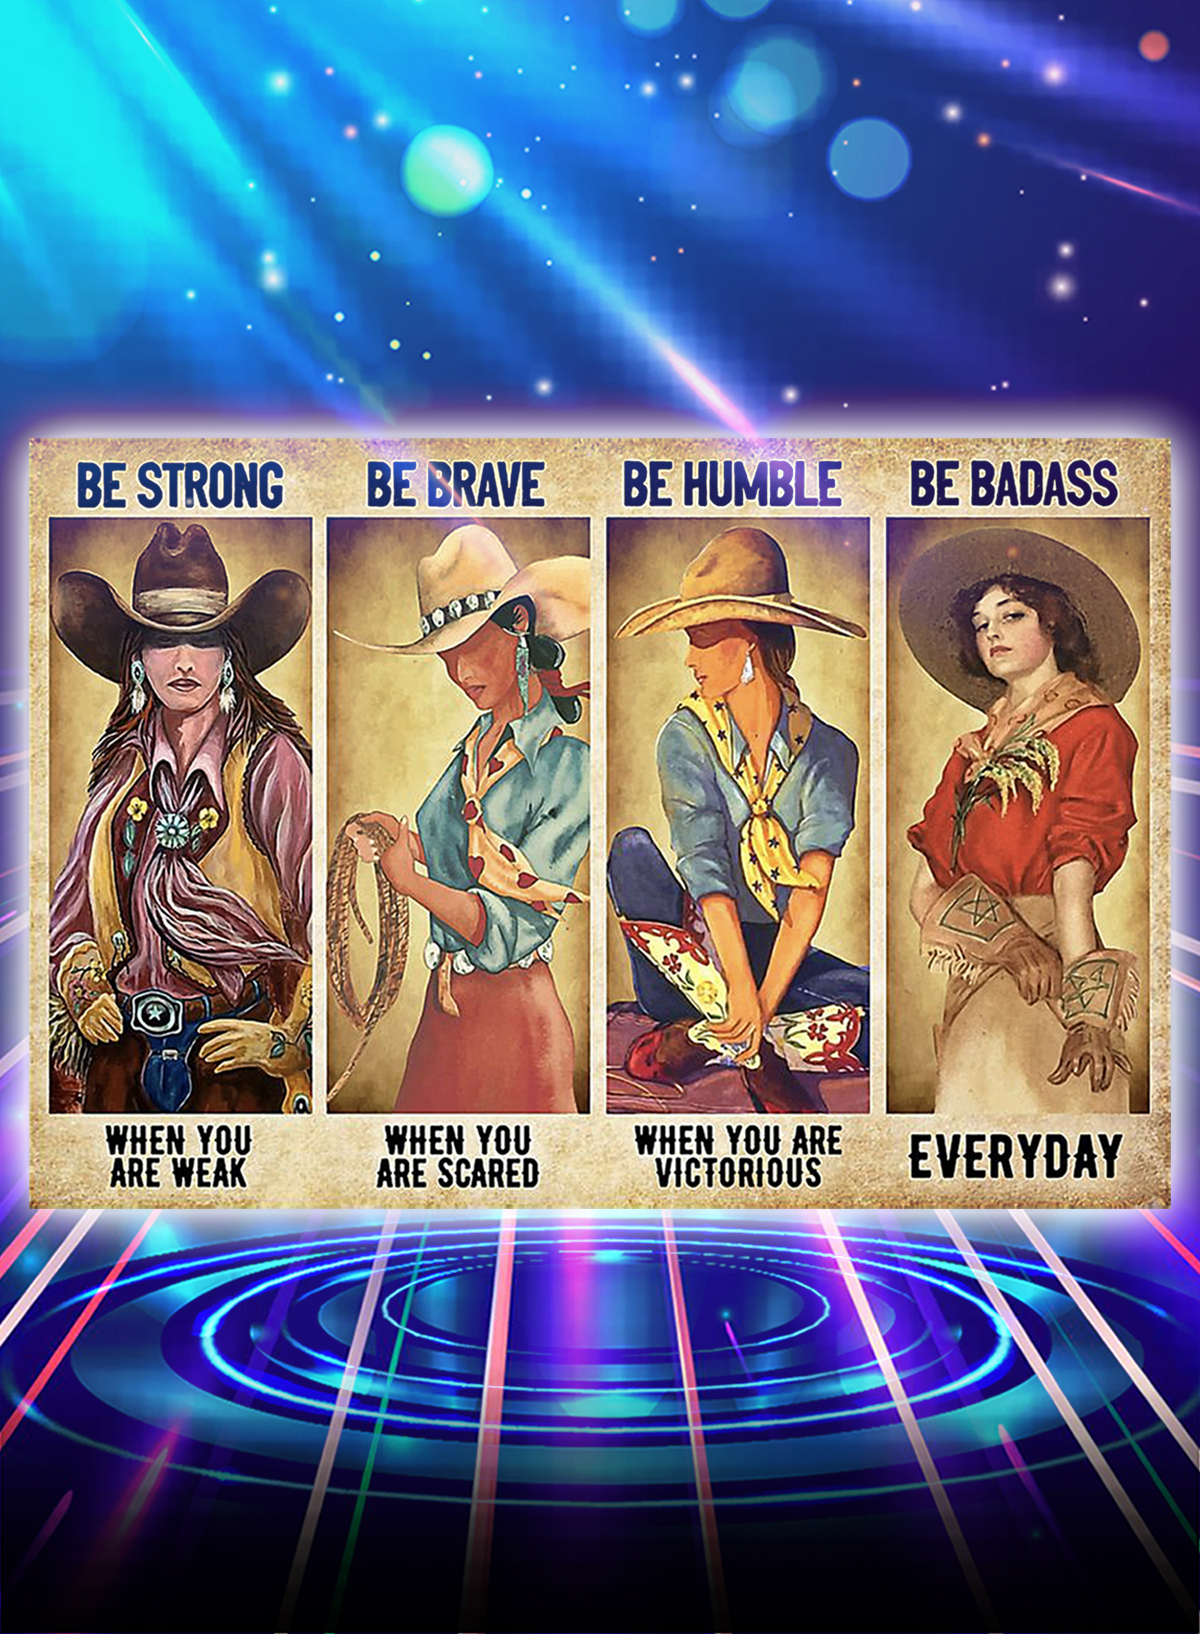 Cowgirl be strong be brave be humble be badass poster - A1